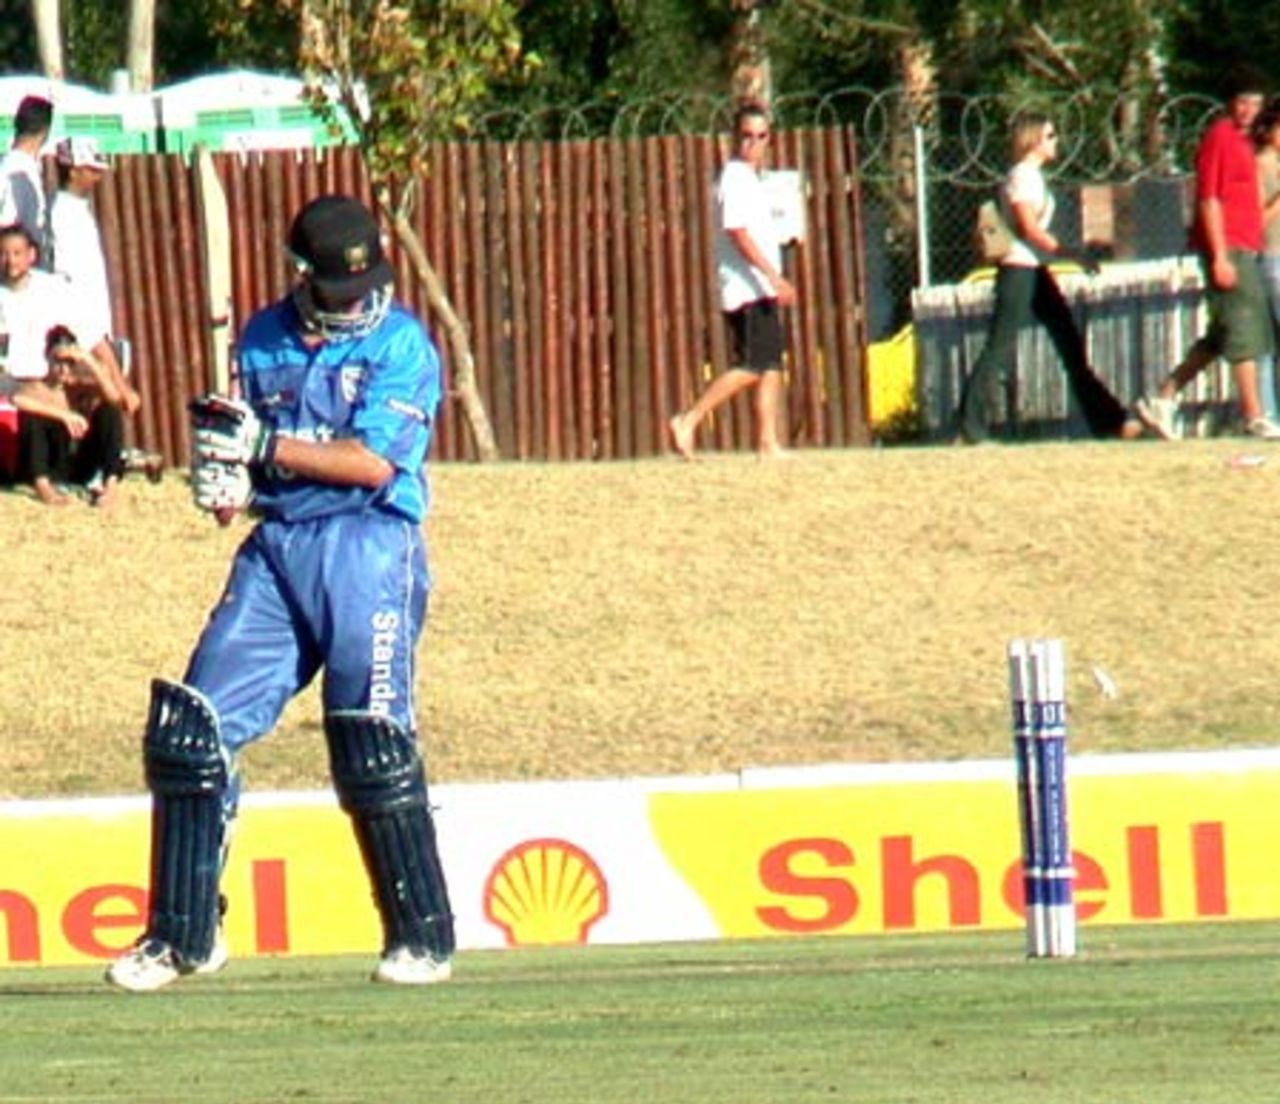 WP's Neil Johnson is cleaned bowled by Boland paceman Willem du Toit in a Standard Bank Cup match at Paarl on Friday